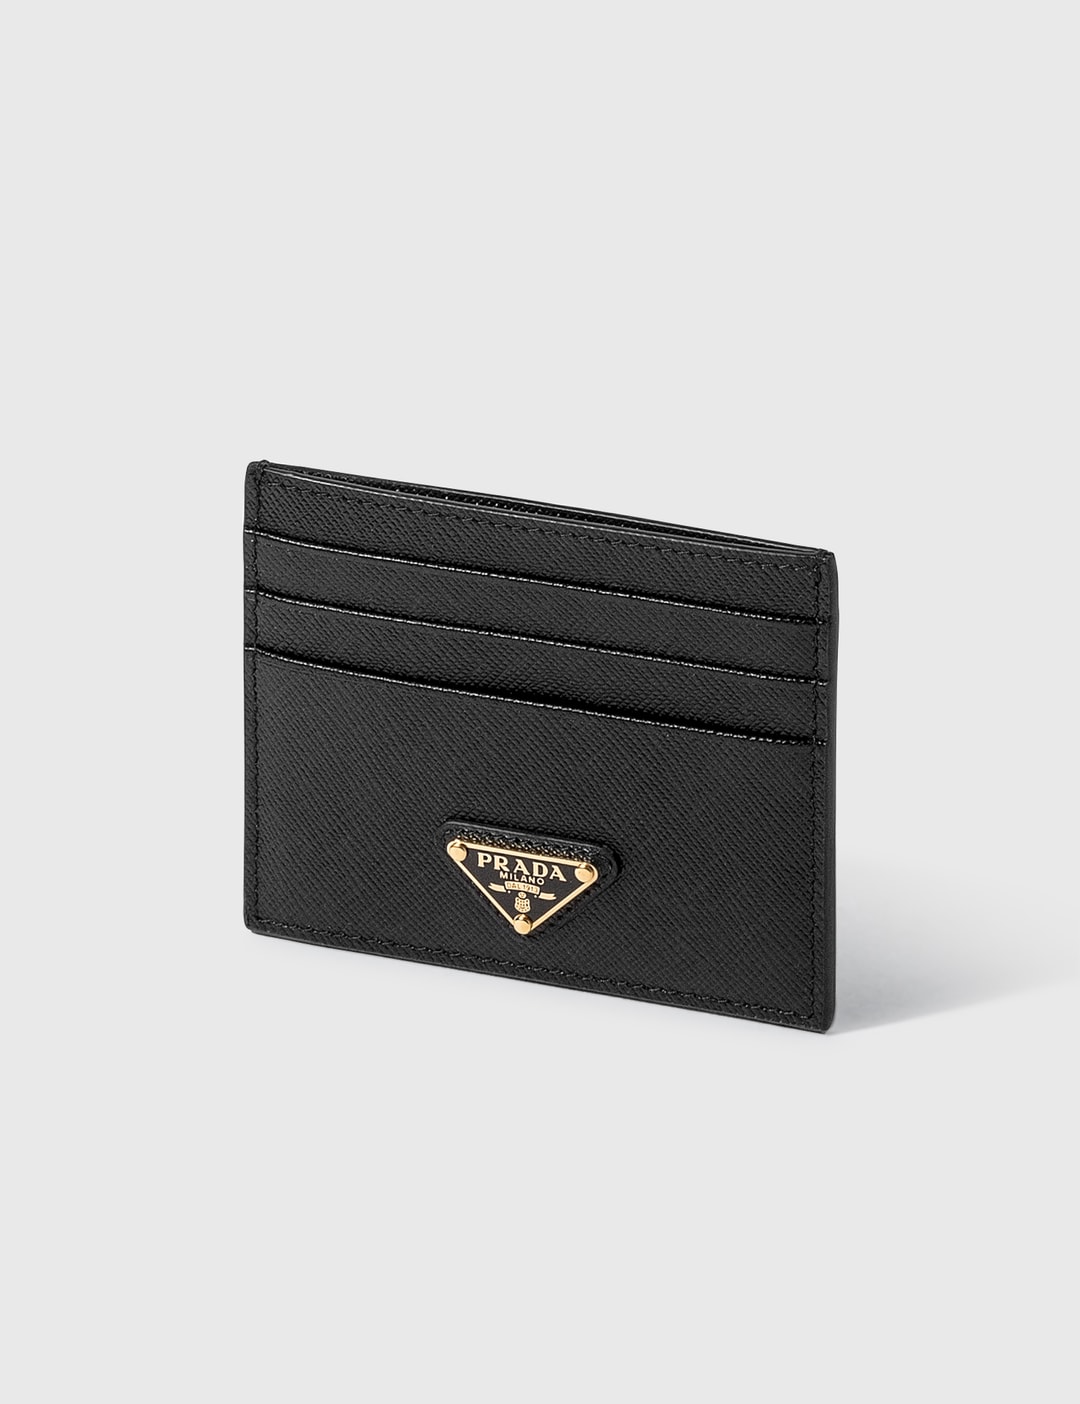 Prada - Saffiano Leather Card Holder | HBX - Globally Curated Fashion and  Lifestyle by Hypebeast